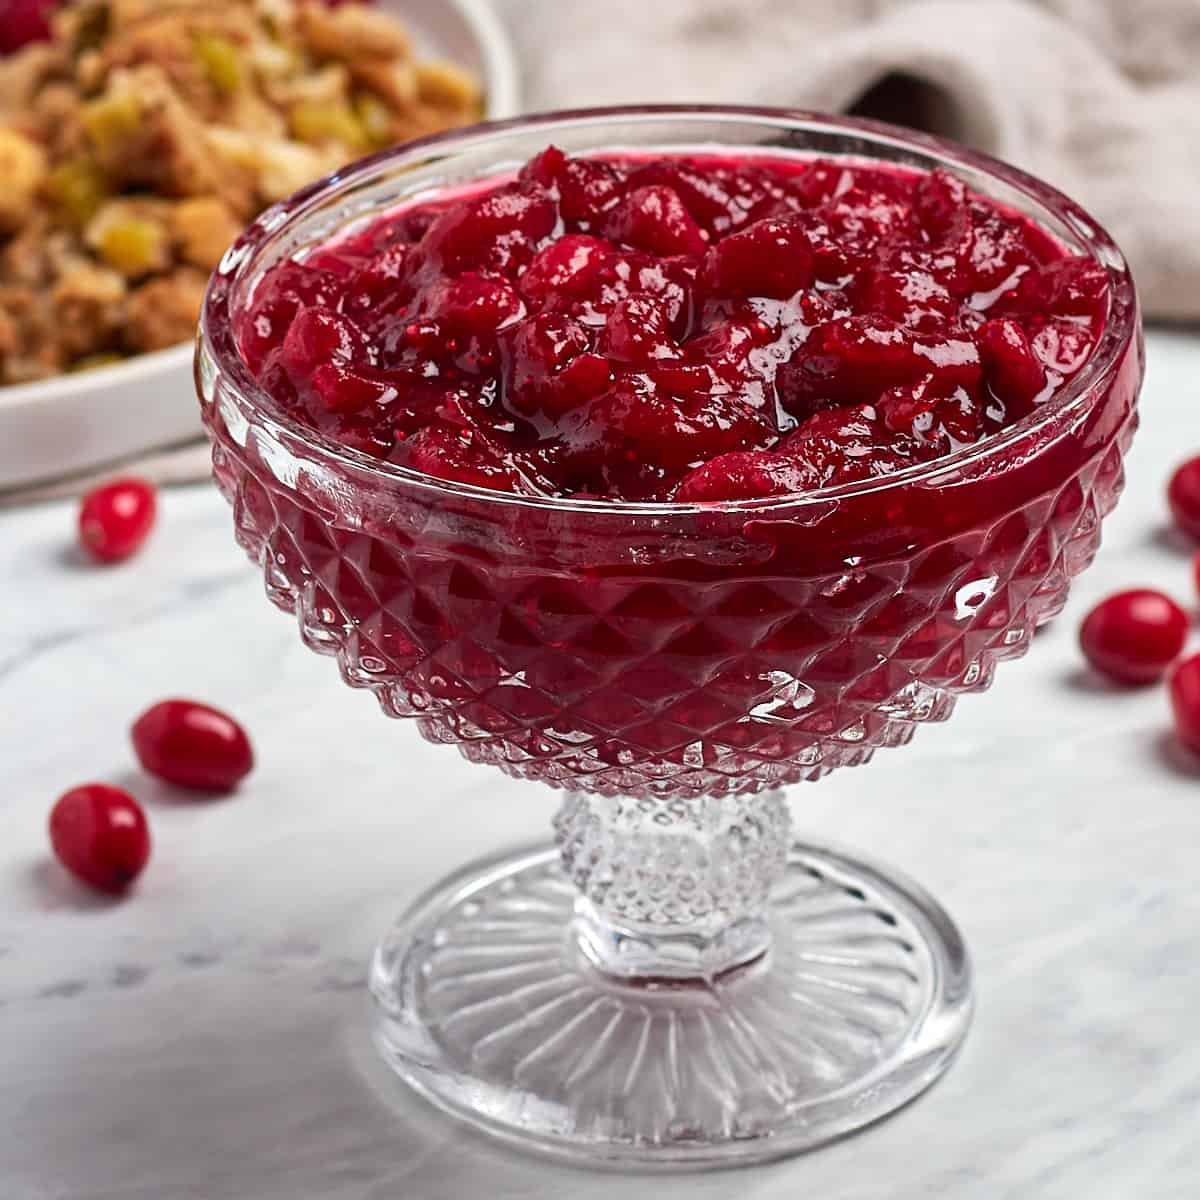 orange cranberry sauce in a glass serving bowl